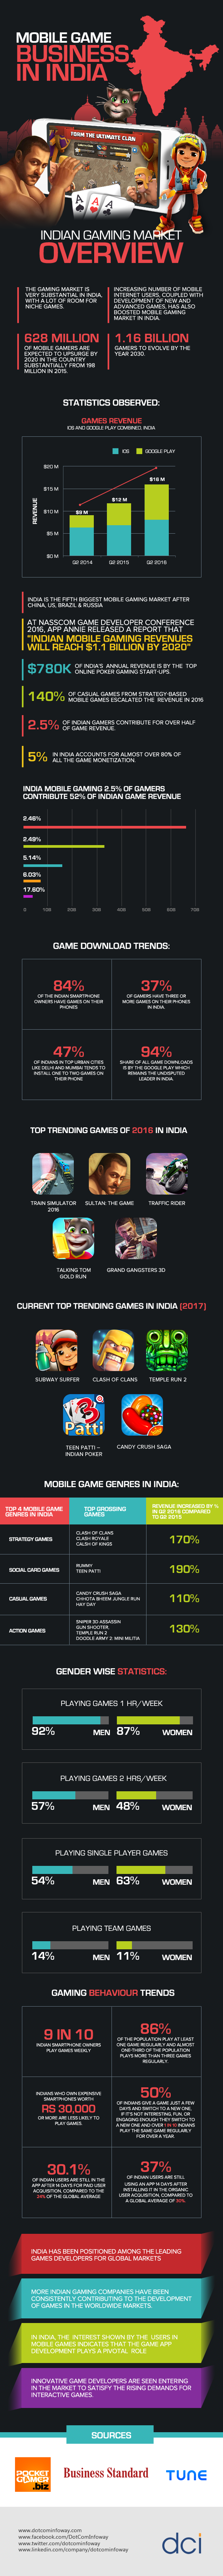 mobile gaming in india